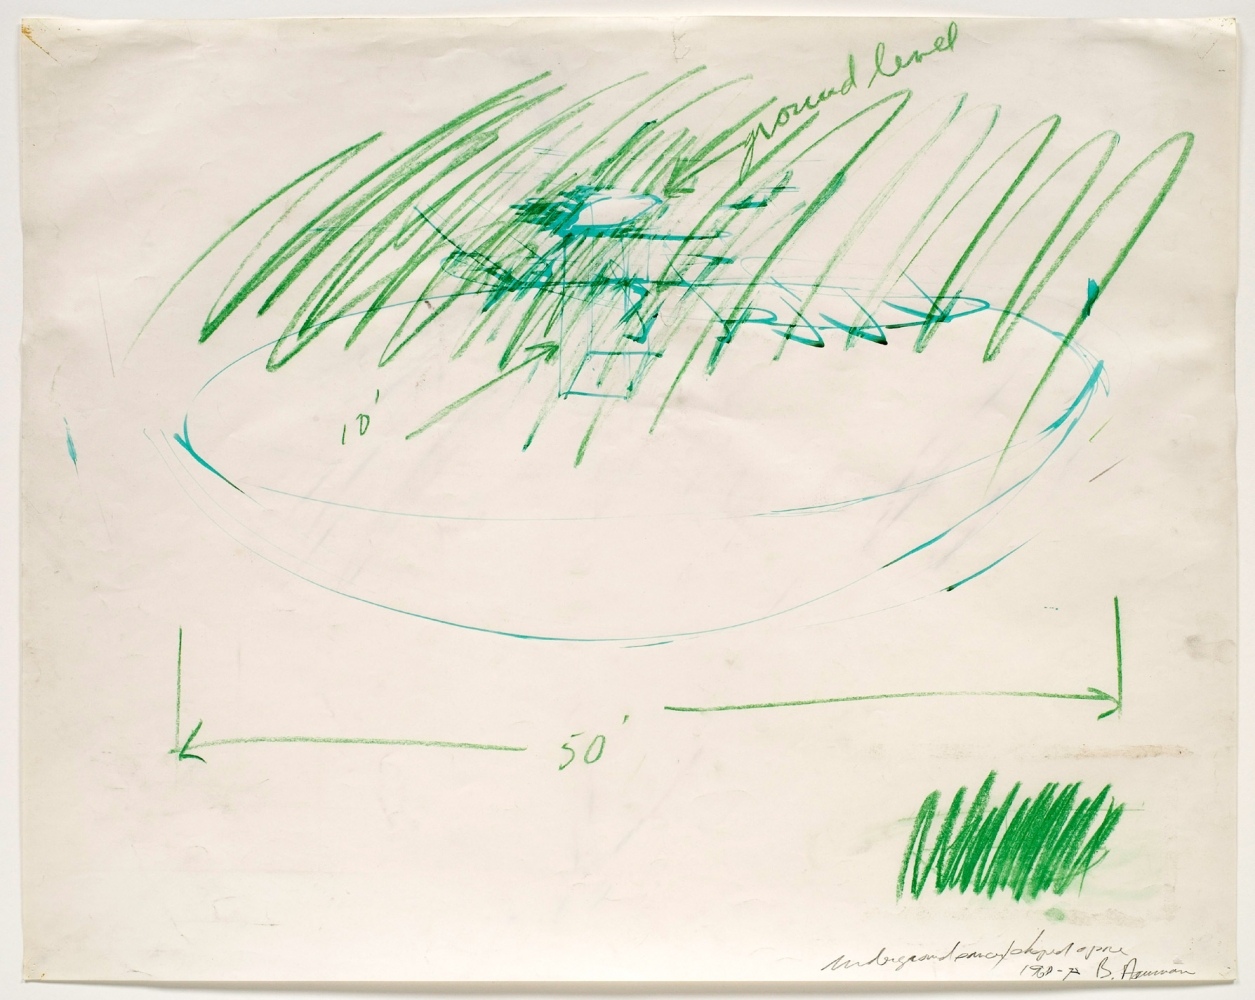 Bruce Nauman Untitled (Study for Model for Underground Space: Saucer), 1968-72